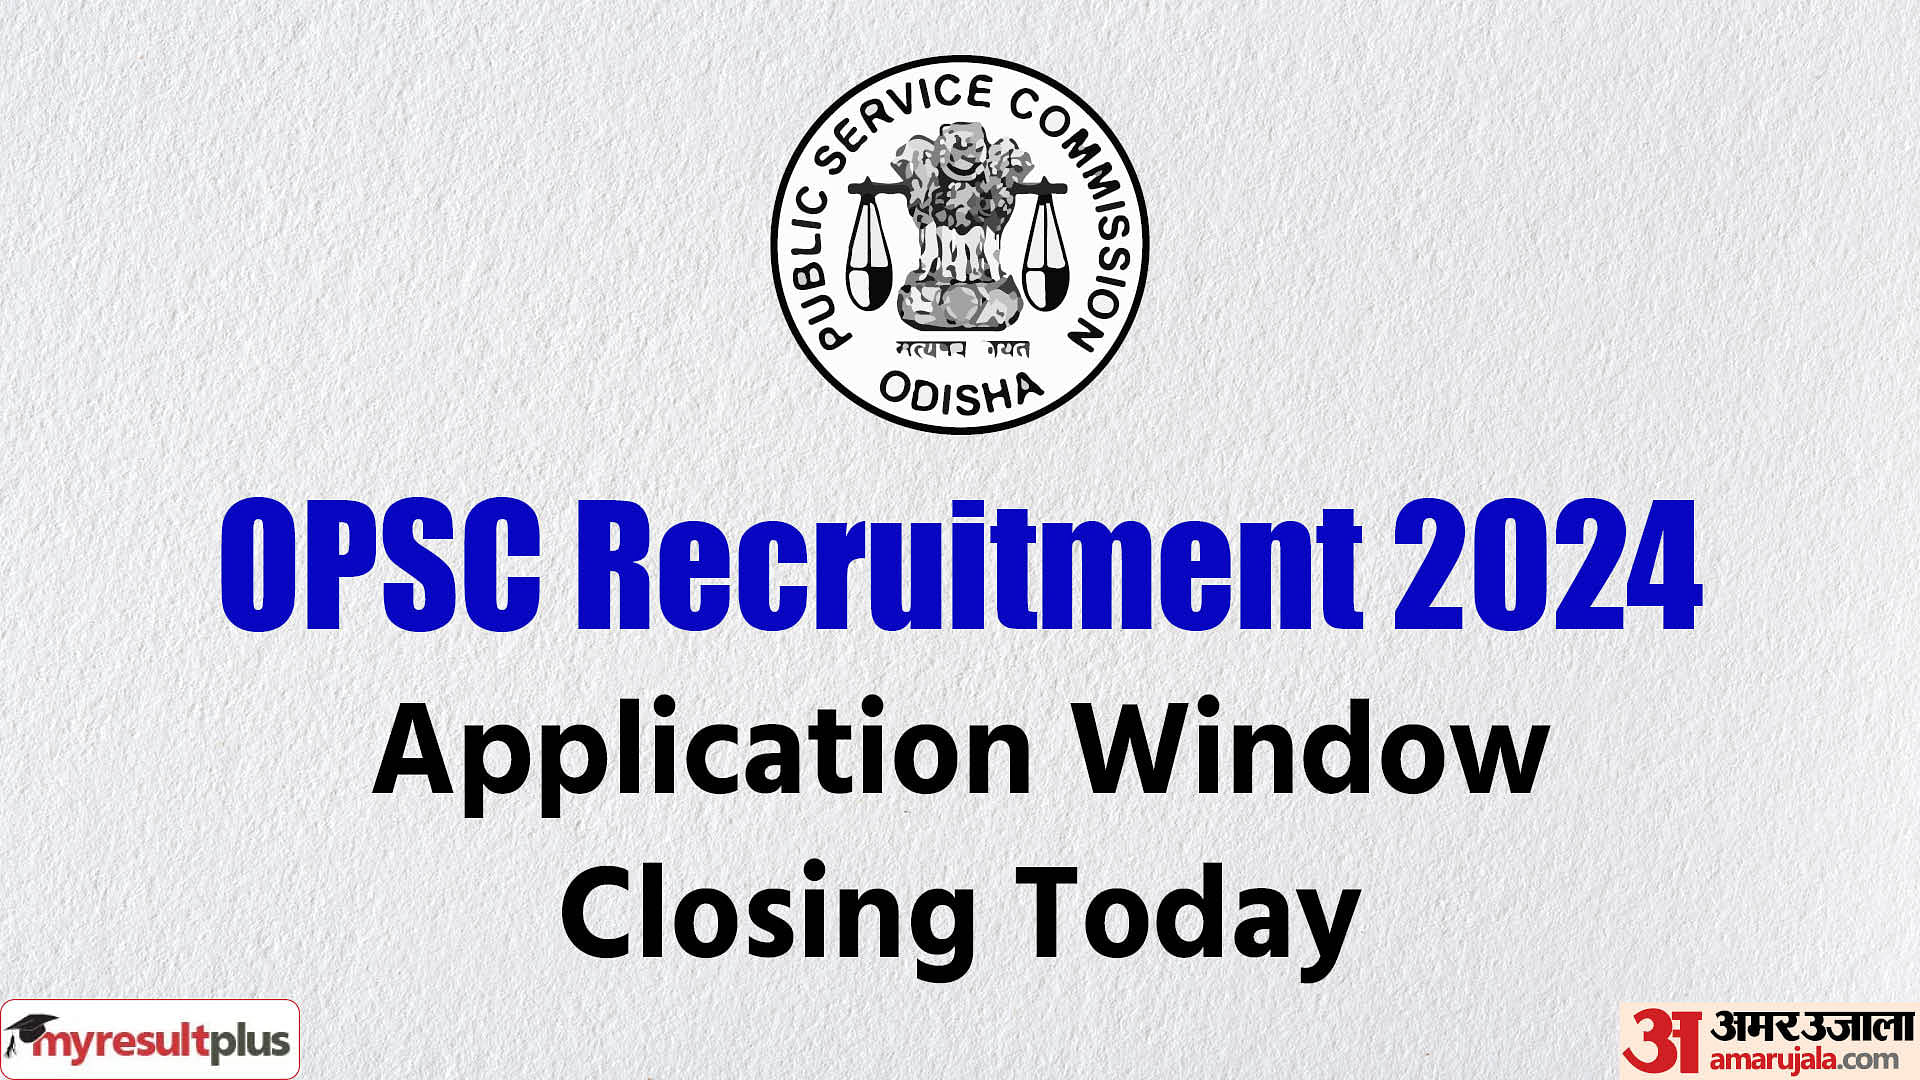 OPSC Recruitment 2024: Application window for the posts of Assistant Professor closing today, Apply here